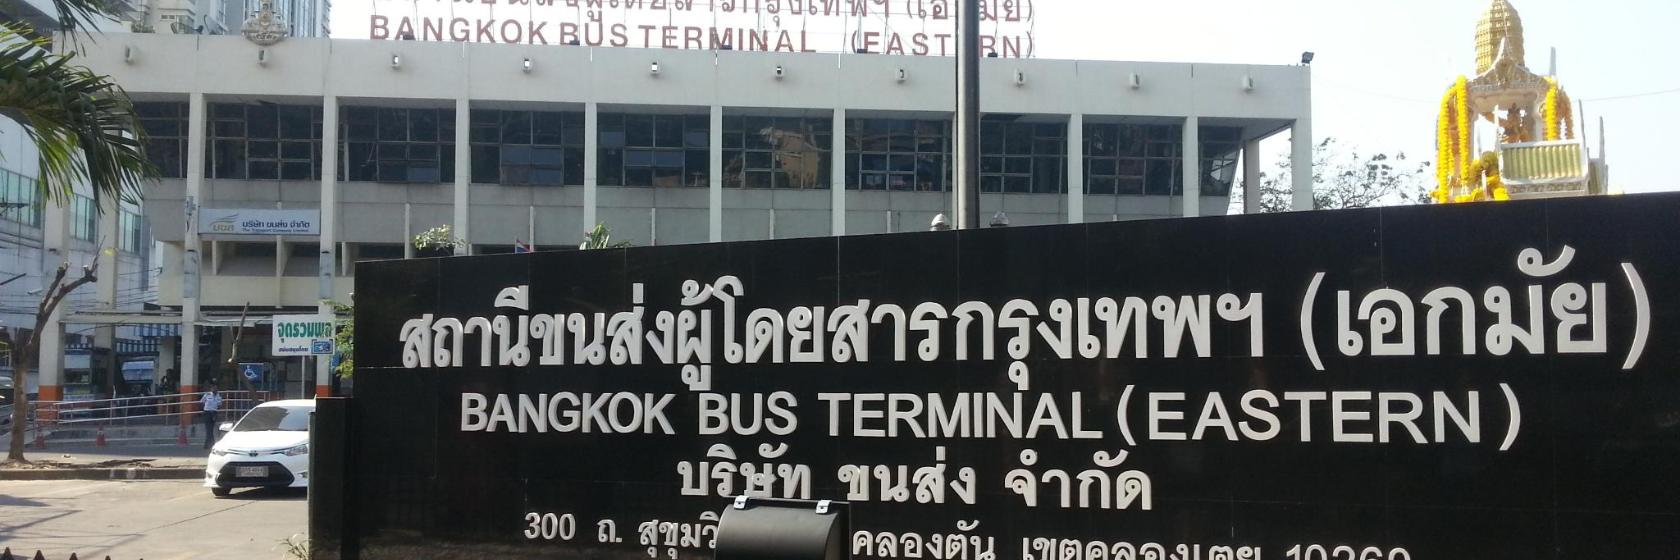 Is it Better to Get from Bangkok to Pattaya by Bus or Taxi?